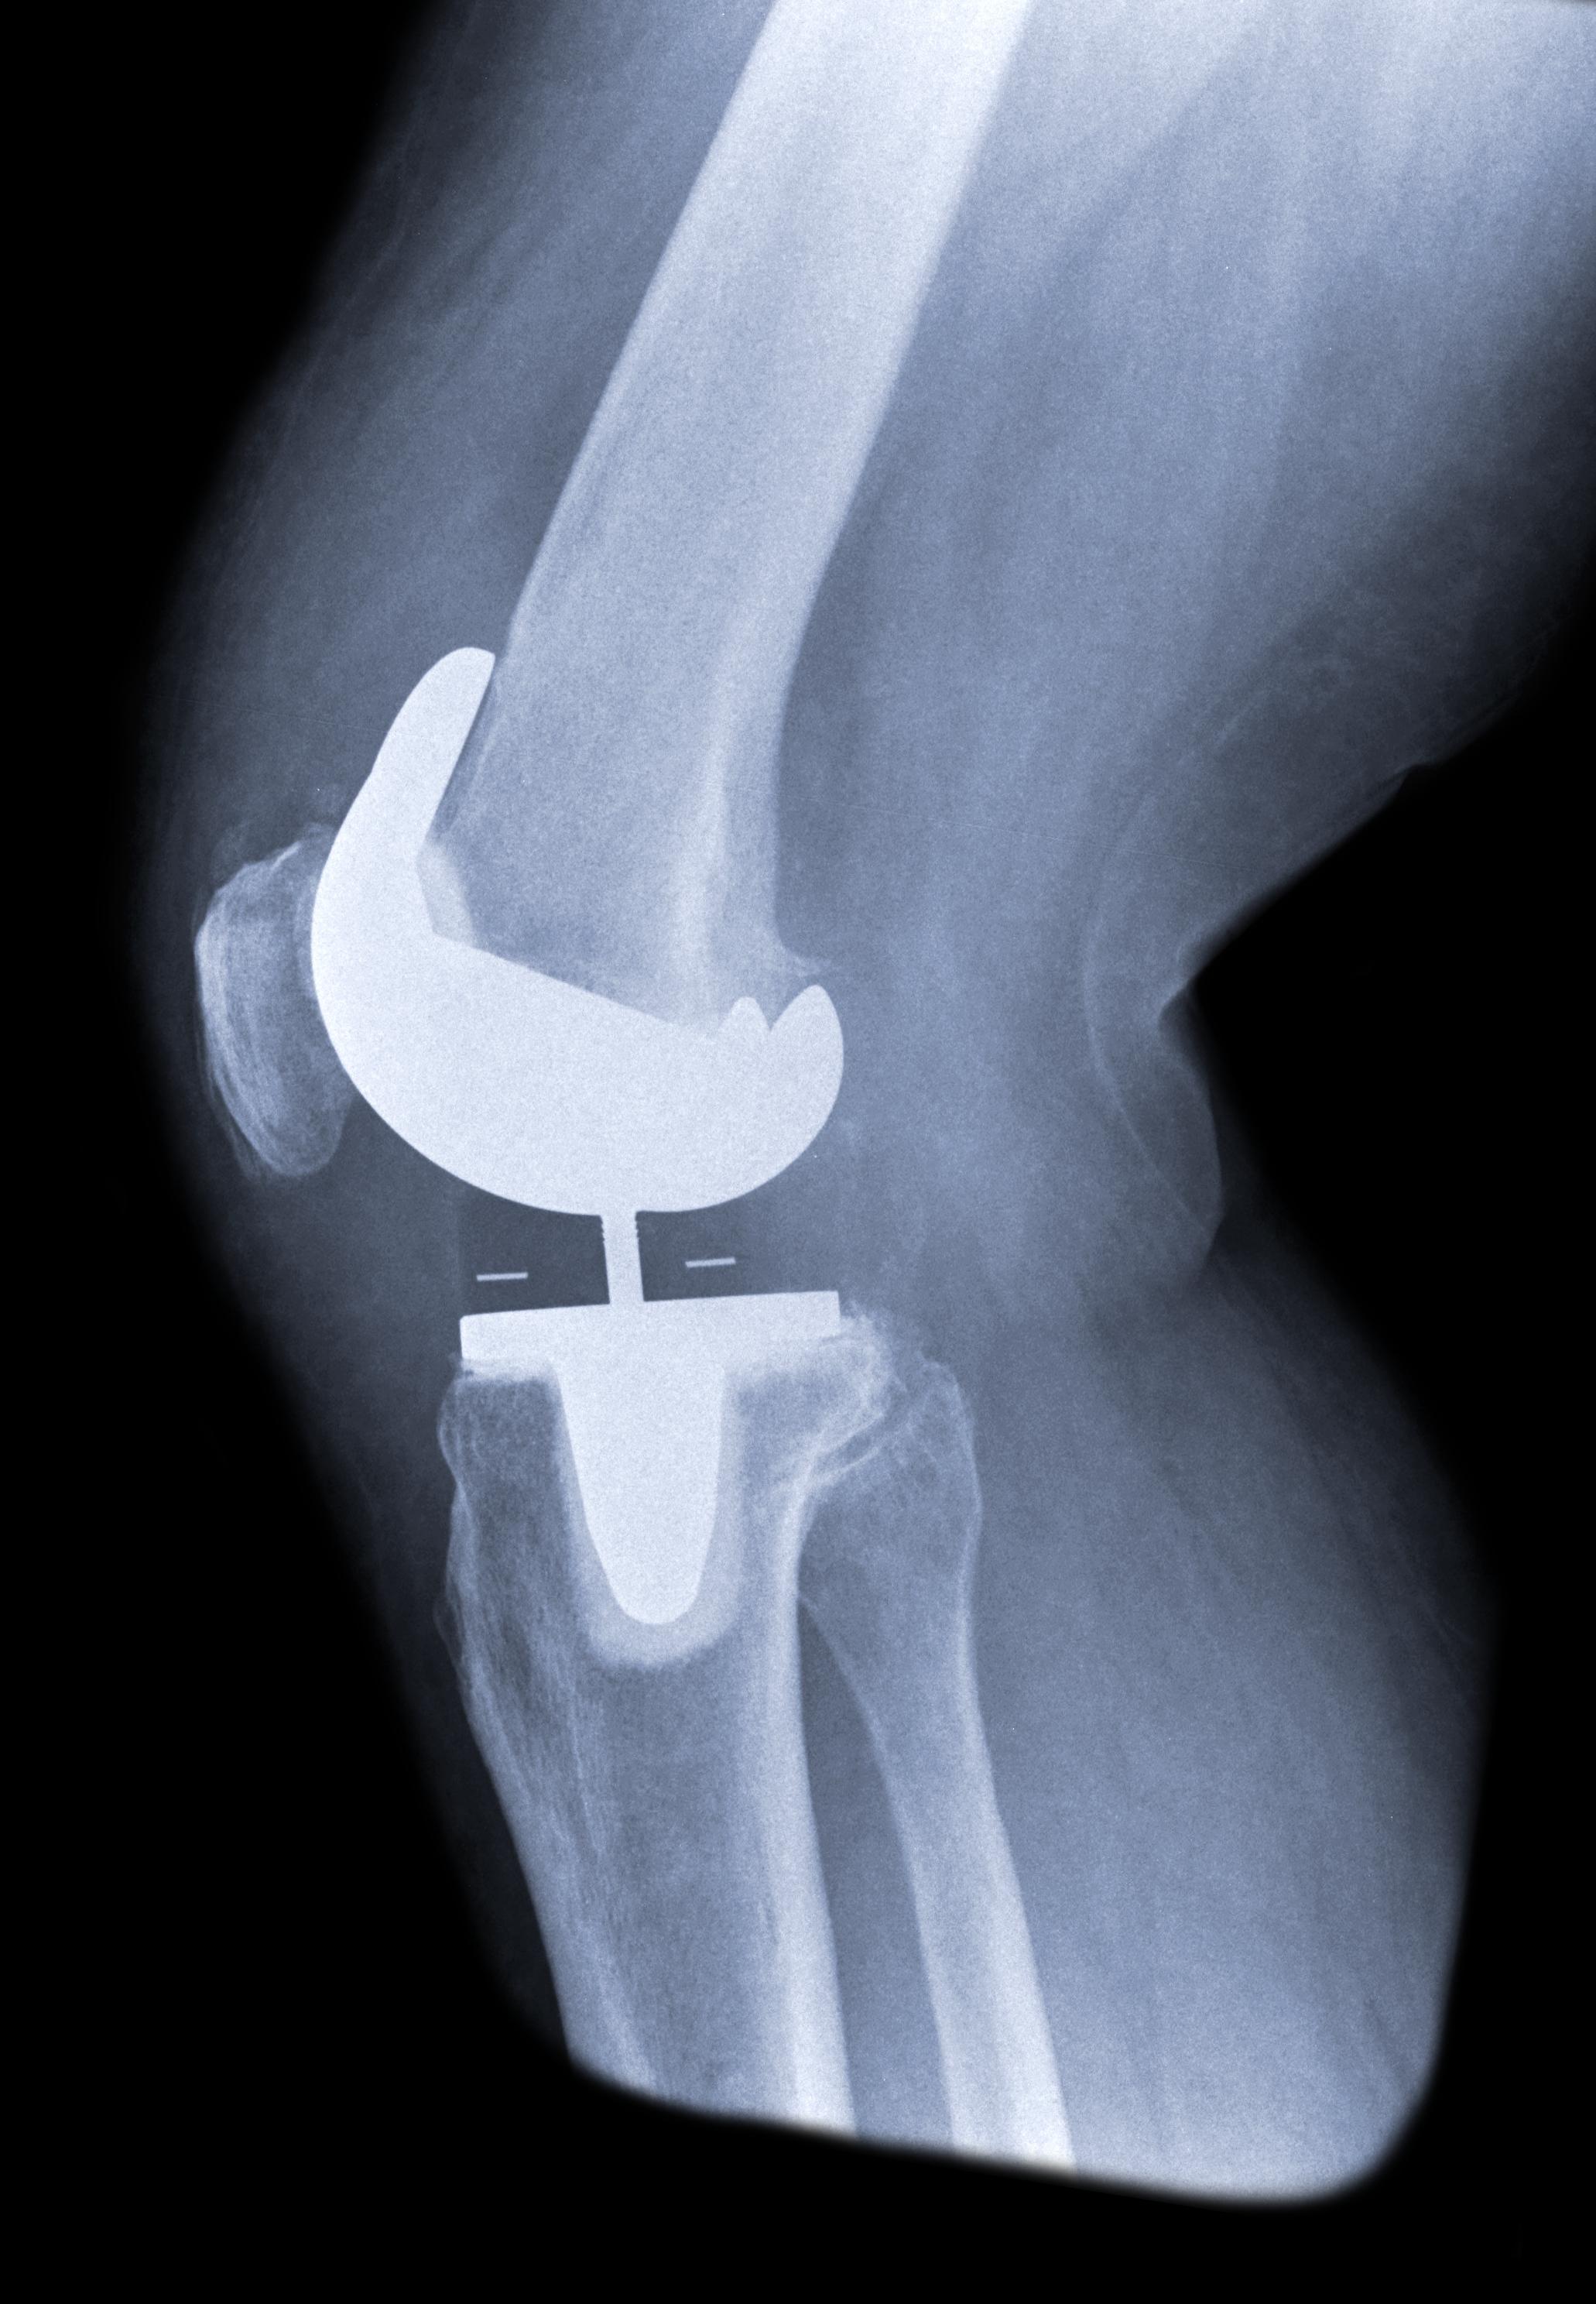 travel insurance knee replacement